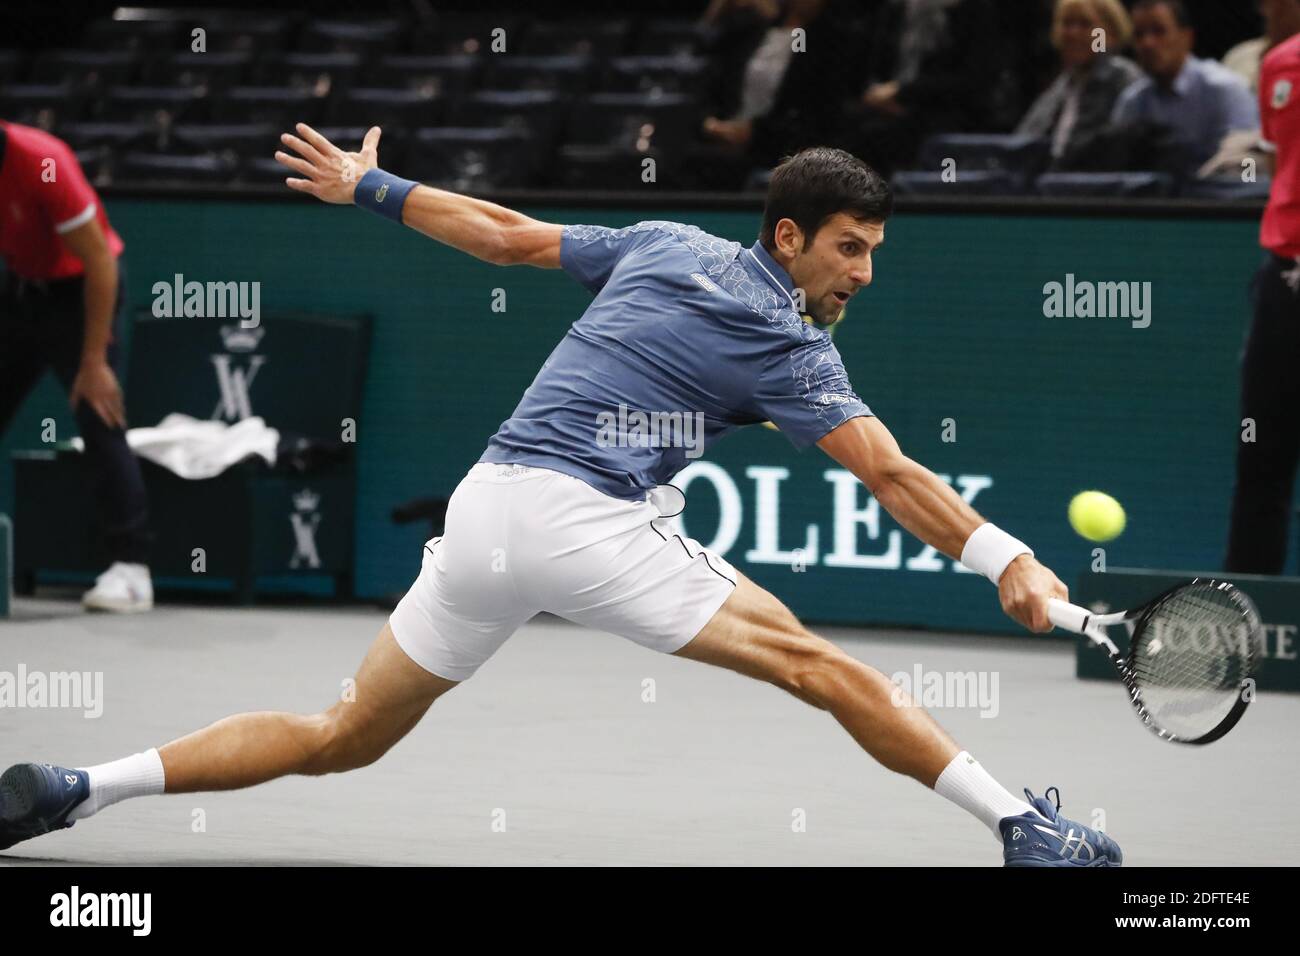 Serbia's Novak Djokovic playing in the second round of the Rolex Tennis  Masters 2018, in the AccorHotels Arena, Paris, France, on October 30th, 2018.  Photo by Henri Szwarc/ABACAPRESS.COM Stock Photo - Alamy